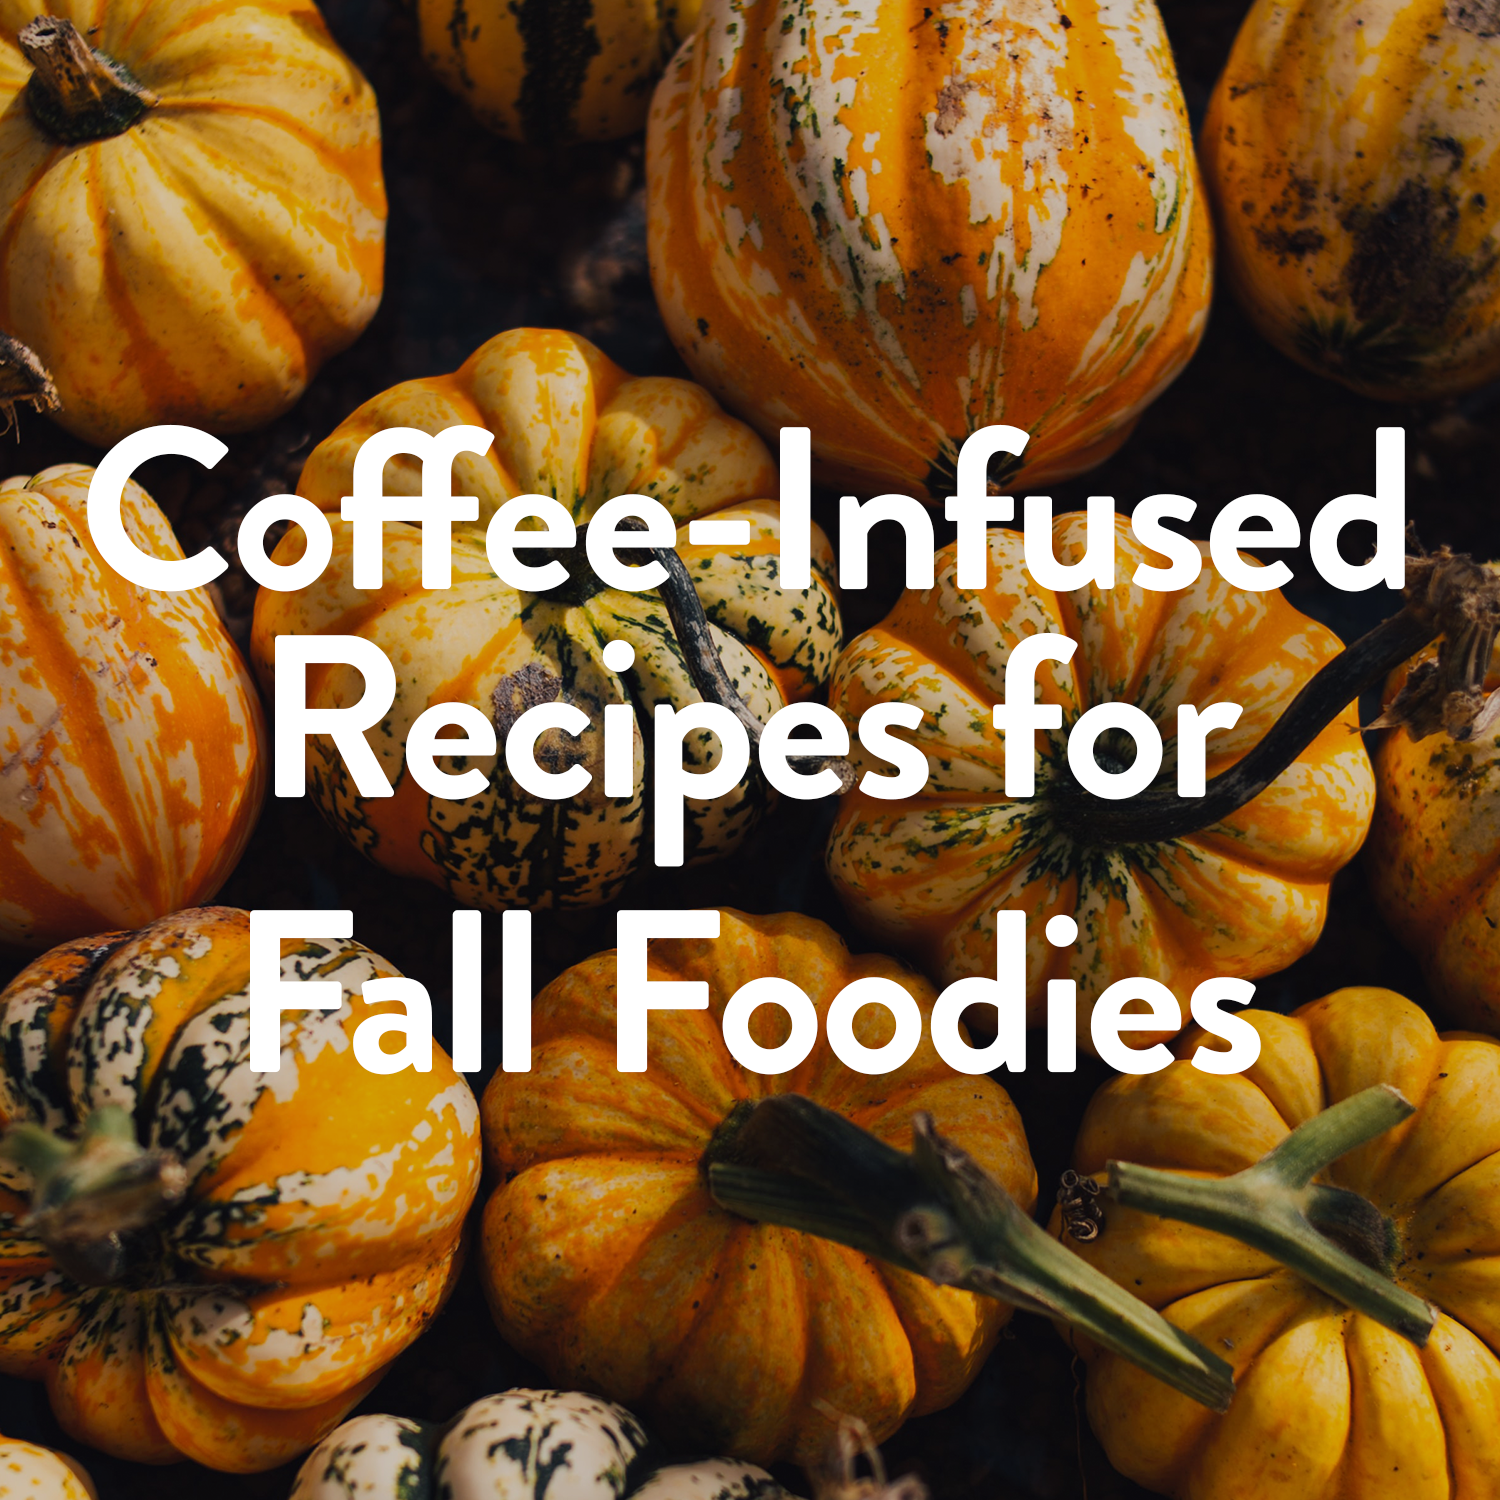 pumpkin picking for fall foodies